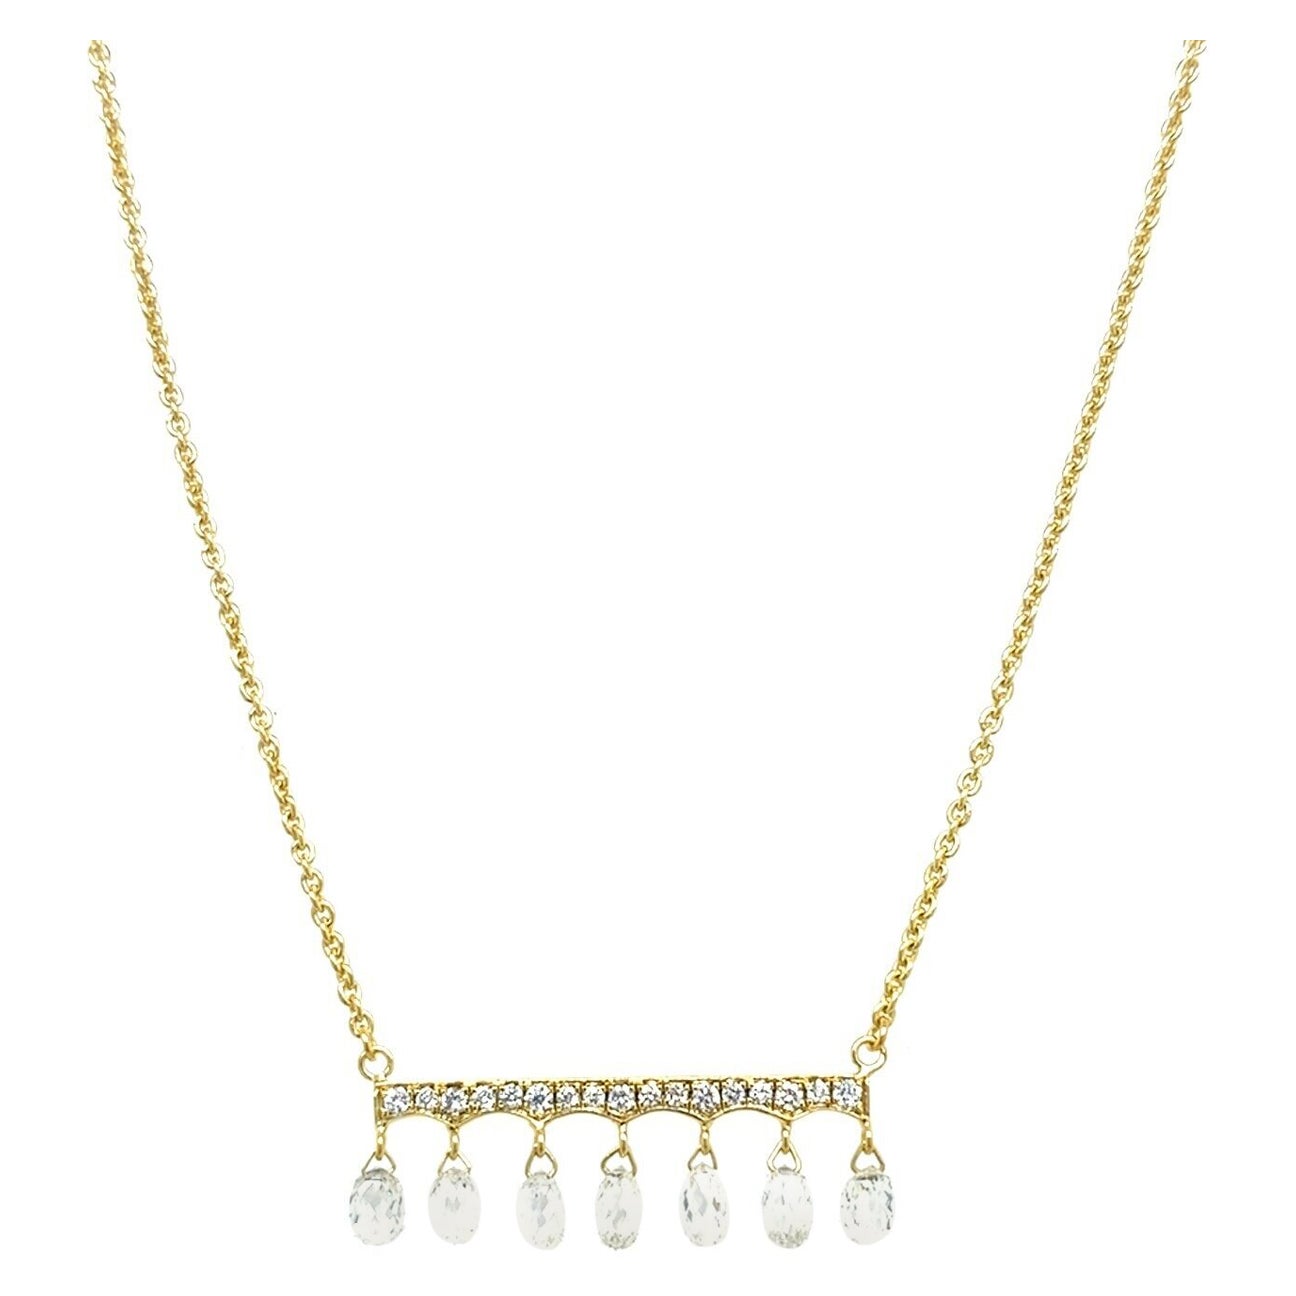 Natural Facetted Diamond Necklace with 1.0ct of Diamonds in 18ct Yellow Gold For Sale